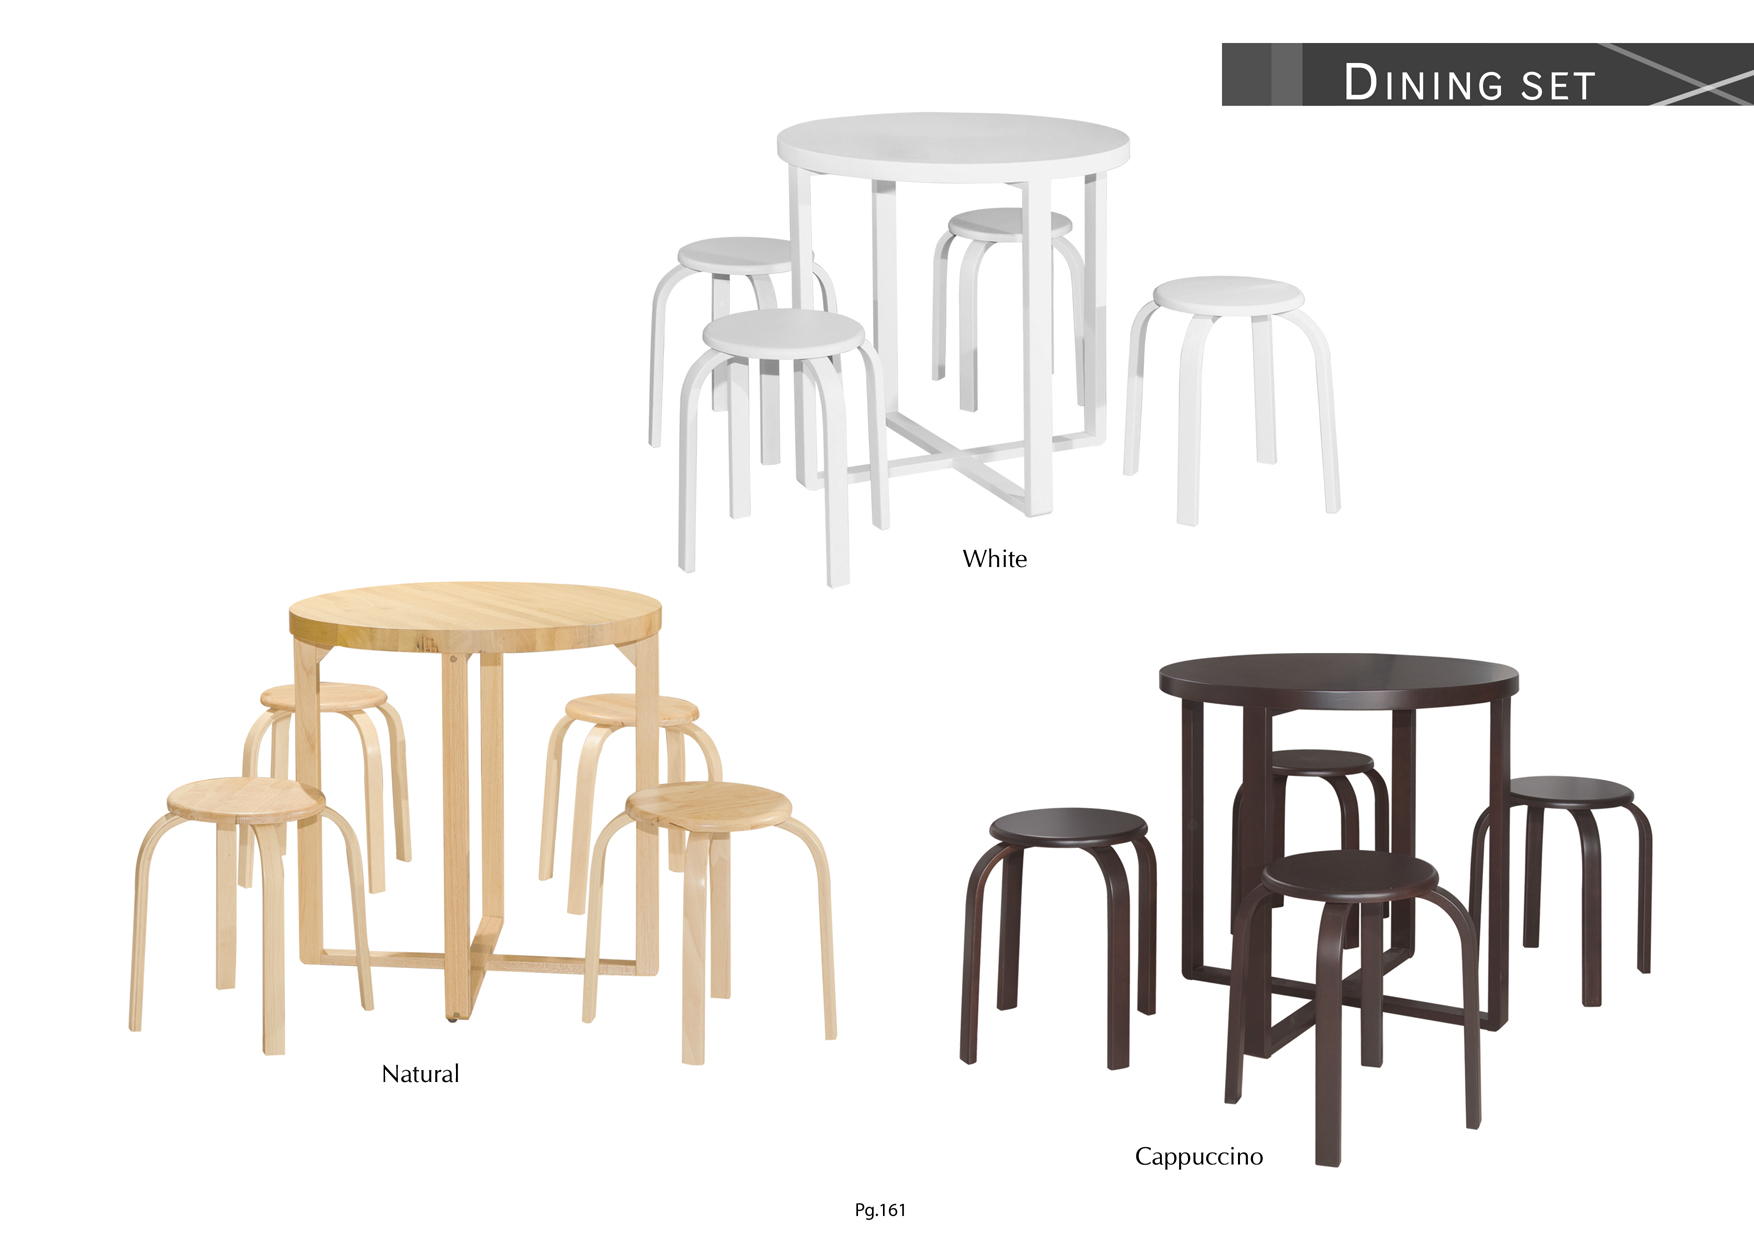 Product: PG161. DONALD DINING SET